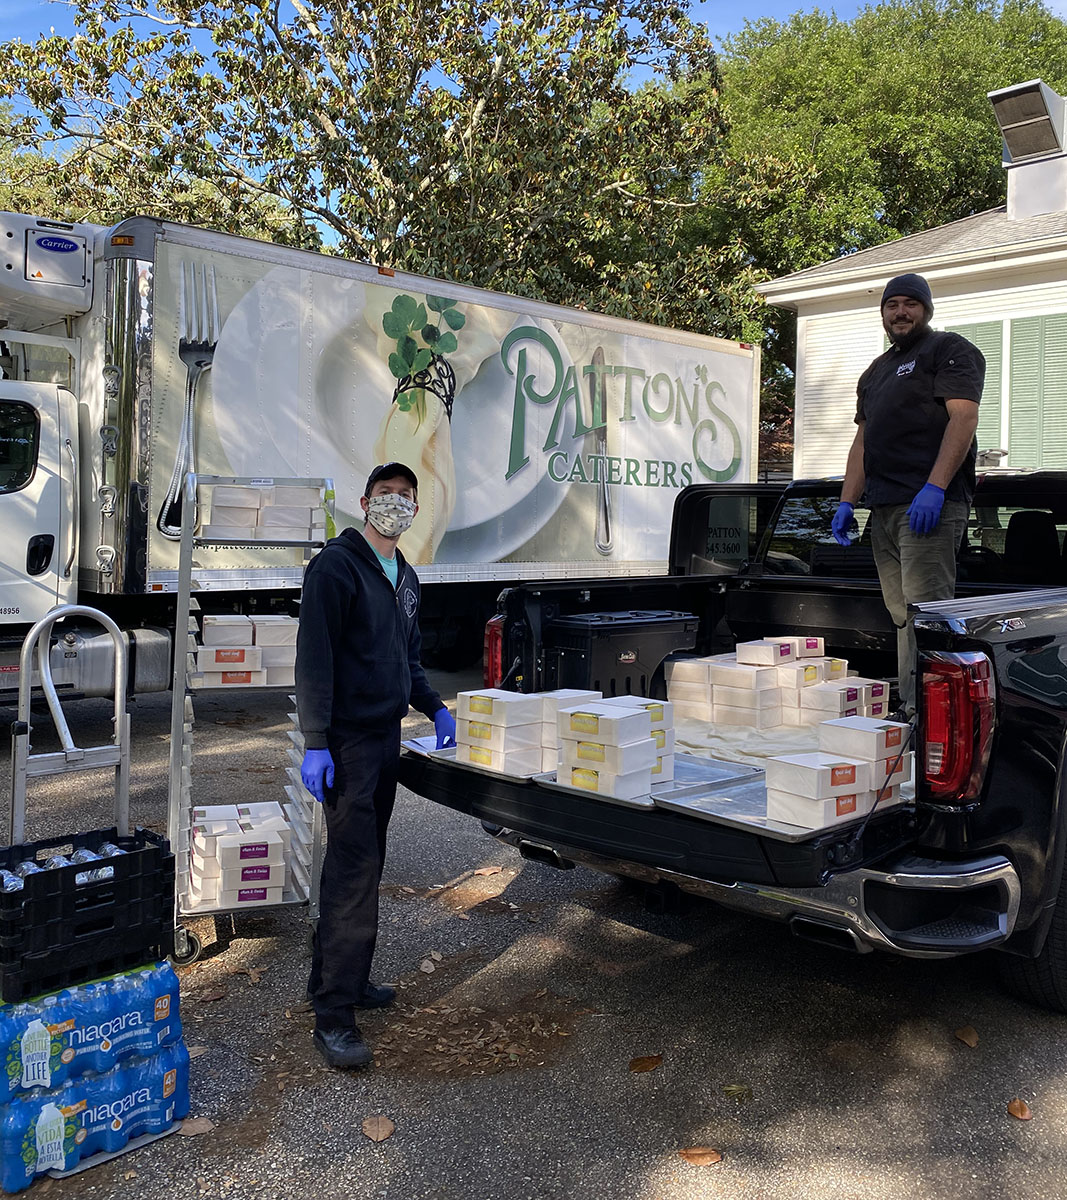 Patton's Caterers deliver meals